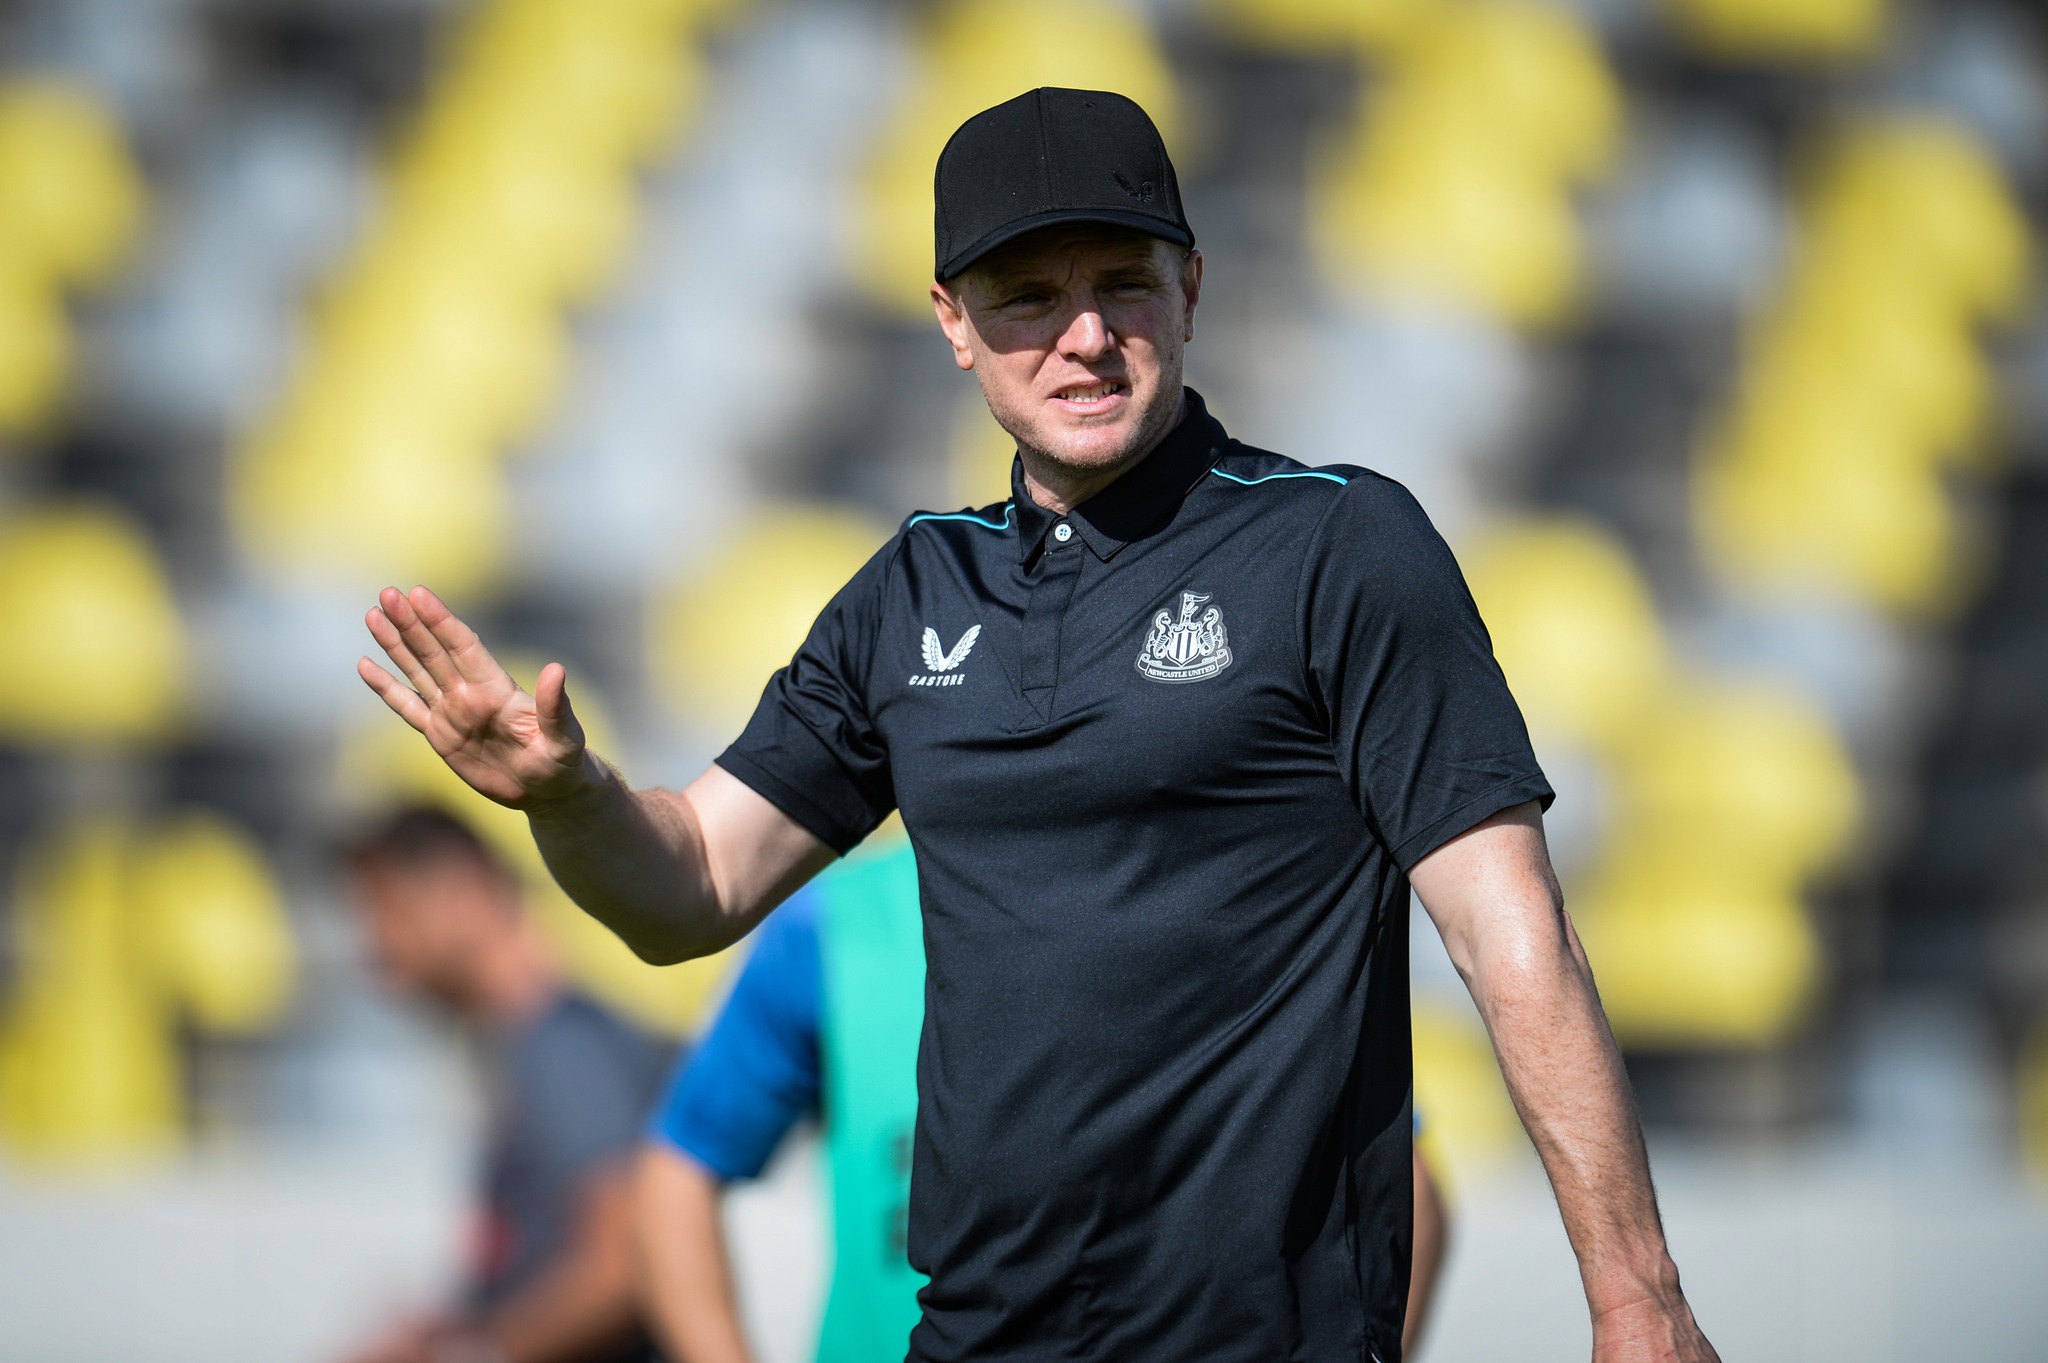 Eddie Howe has revealed details of a motivational speech given to Newcastle United players by PIF chief and club chairman, Yasir Al-Rumayyan, during their Saudi training camp. (Facebook/@newcastleunited)